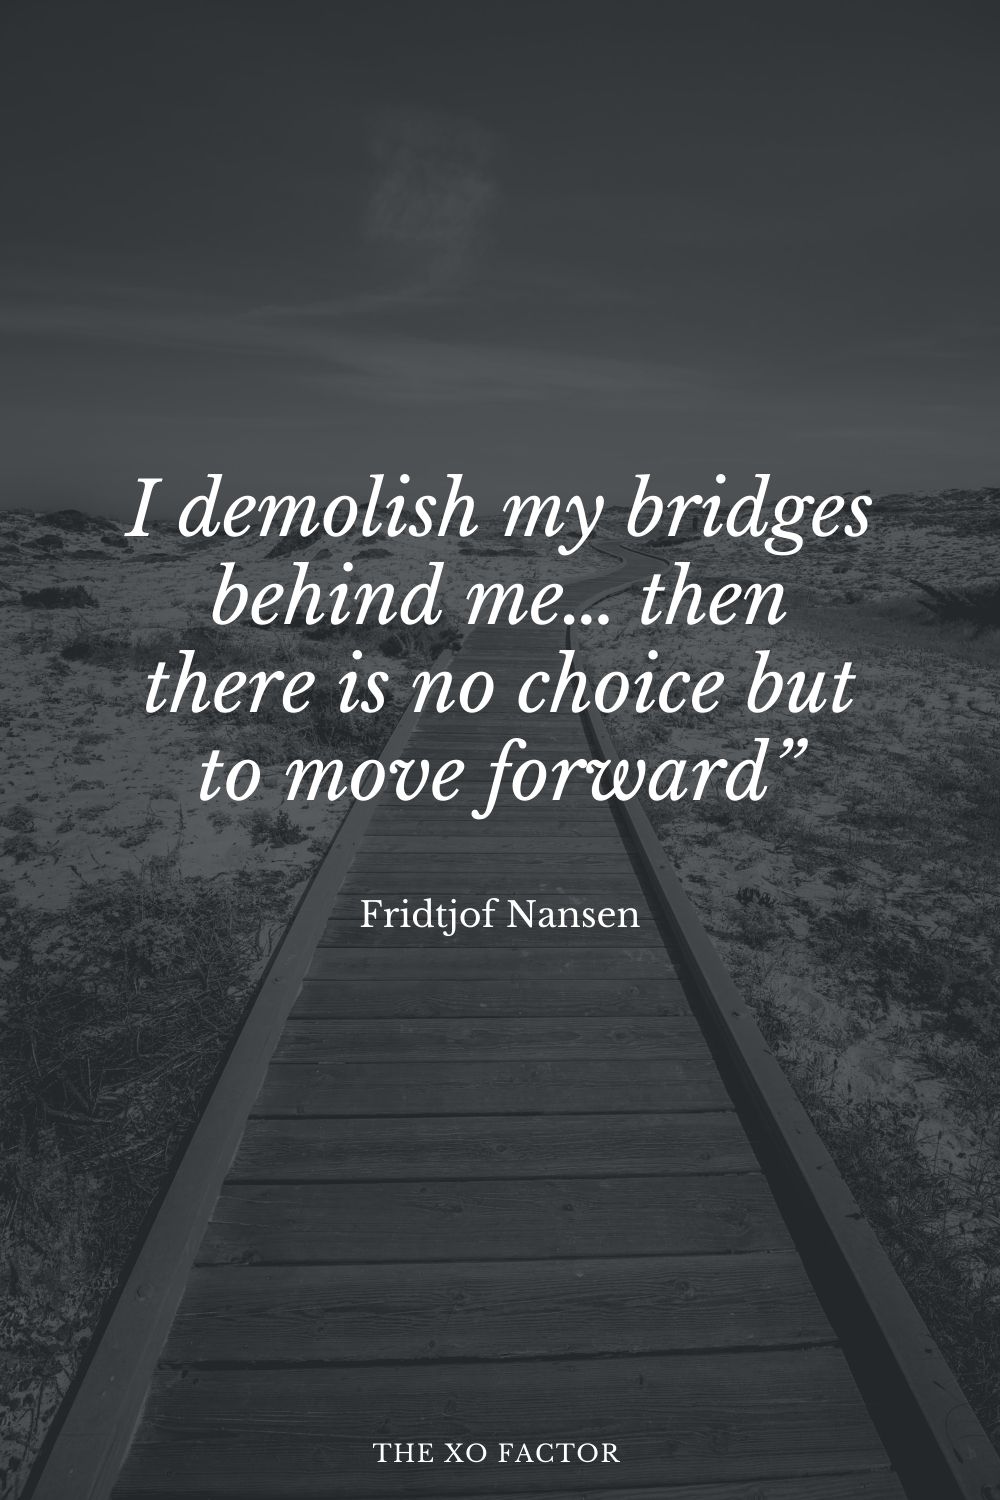 I demolish my bridges behind me… then there is no choice but to move forward” Fridtjof Nansen